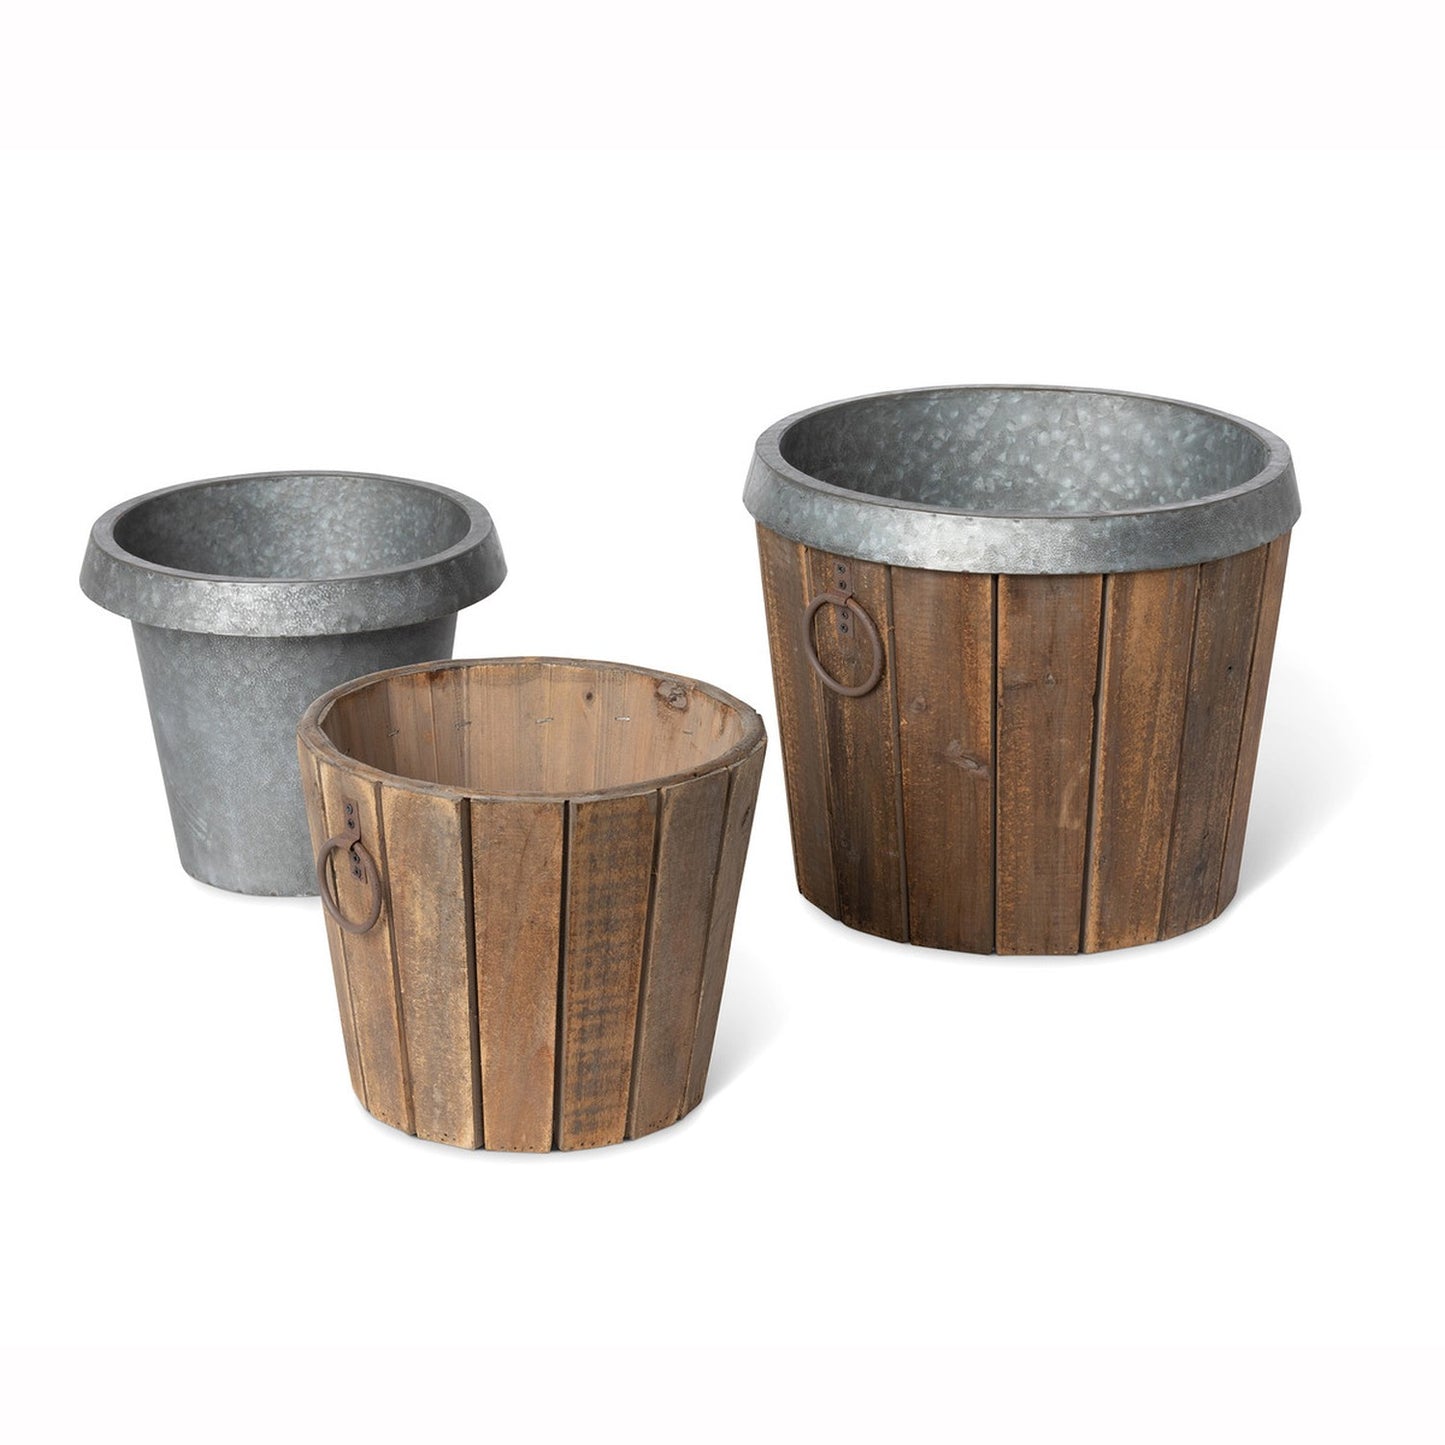 Park Hill Collection Garden Floral Galvanized Lined Wooden Planters Set of 2